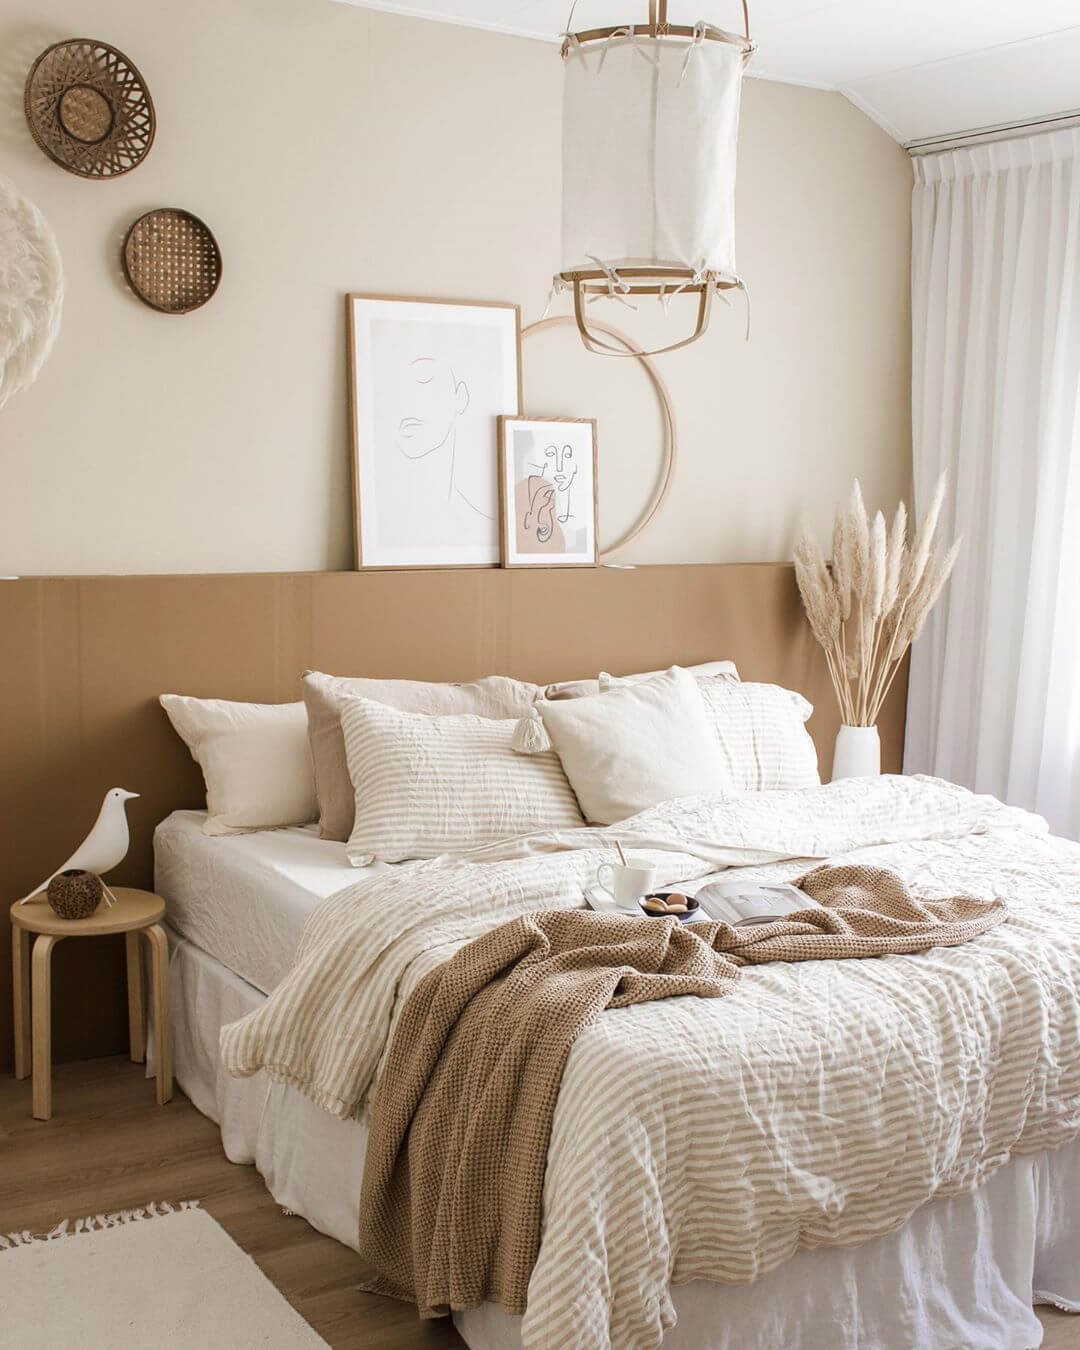 Decor Tips for a Minimalist Bedroom